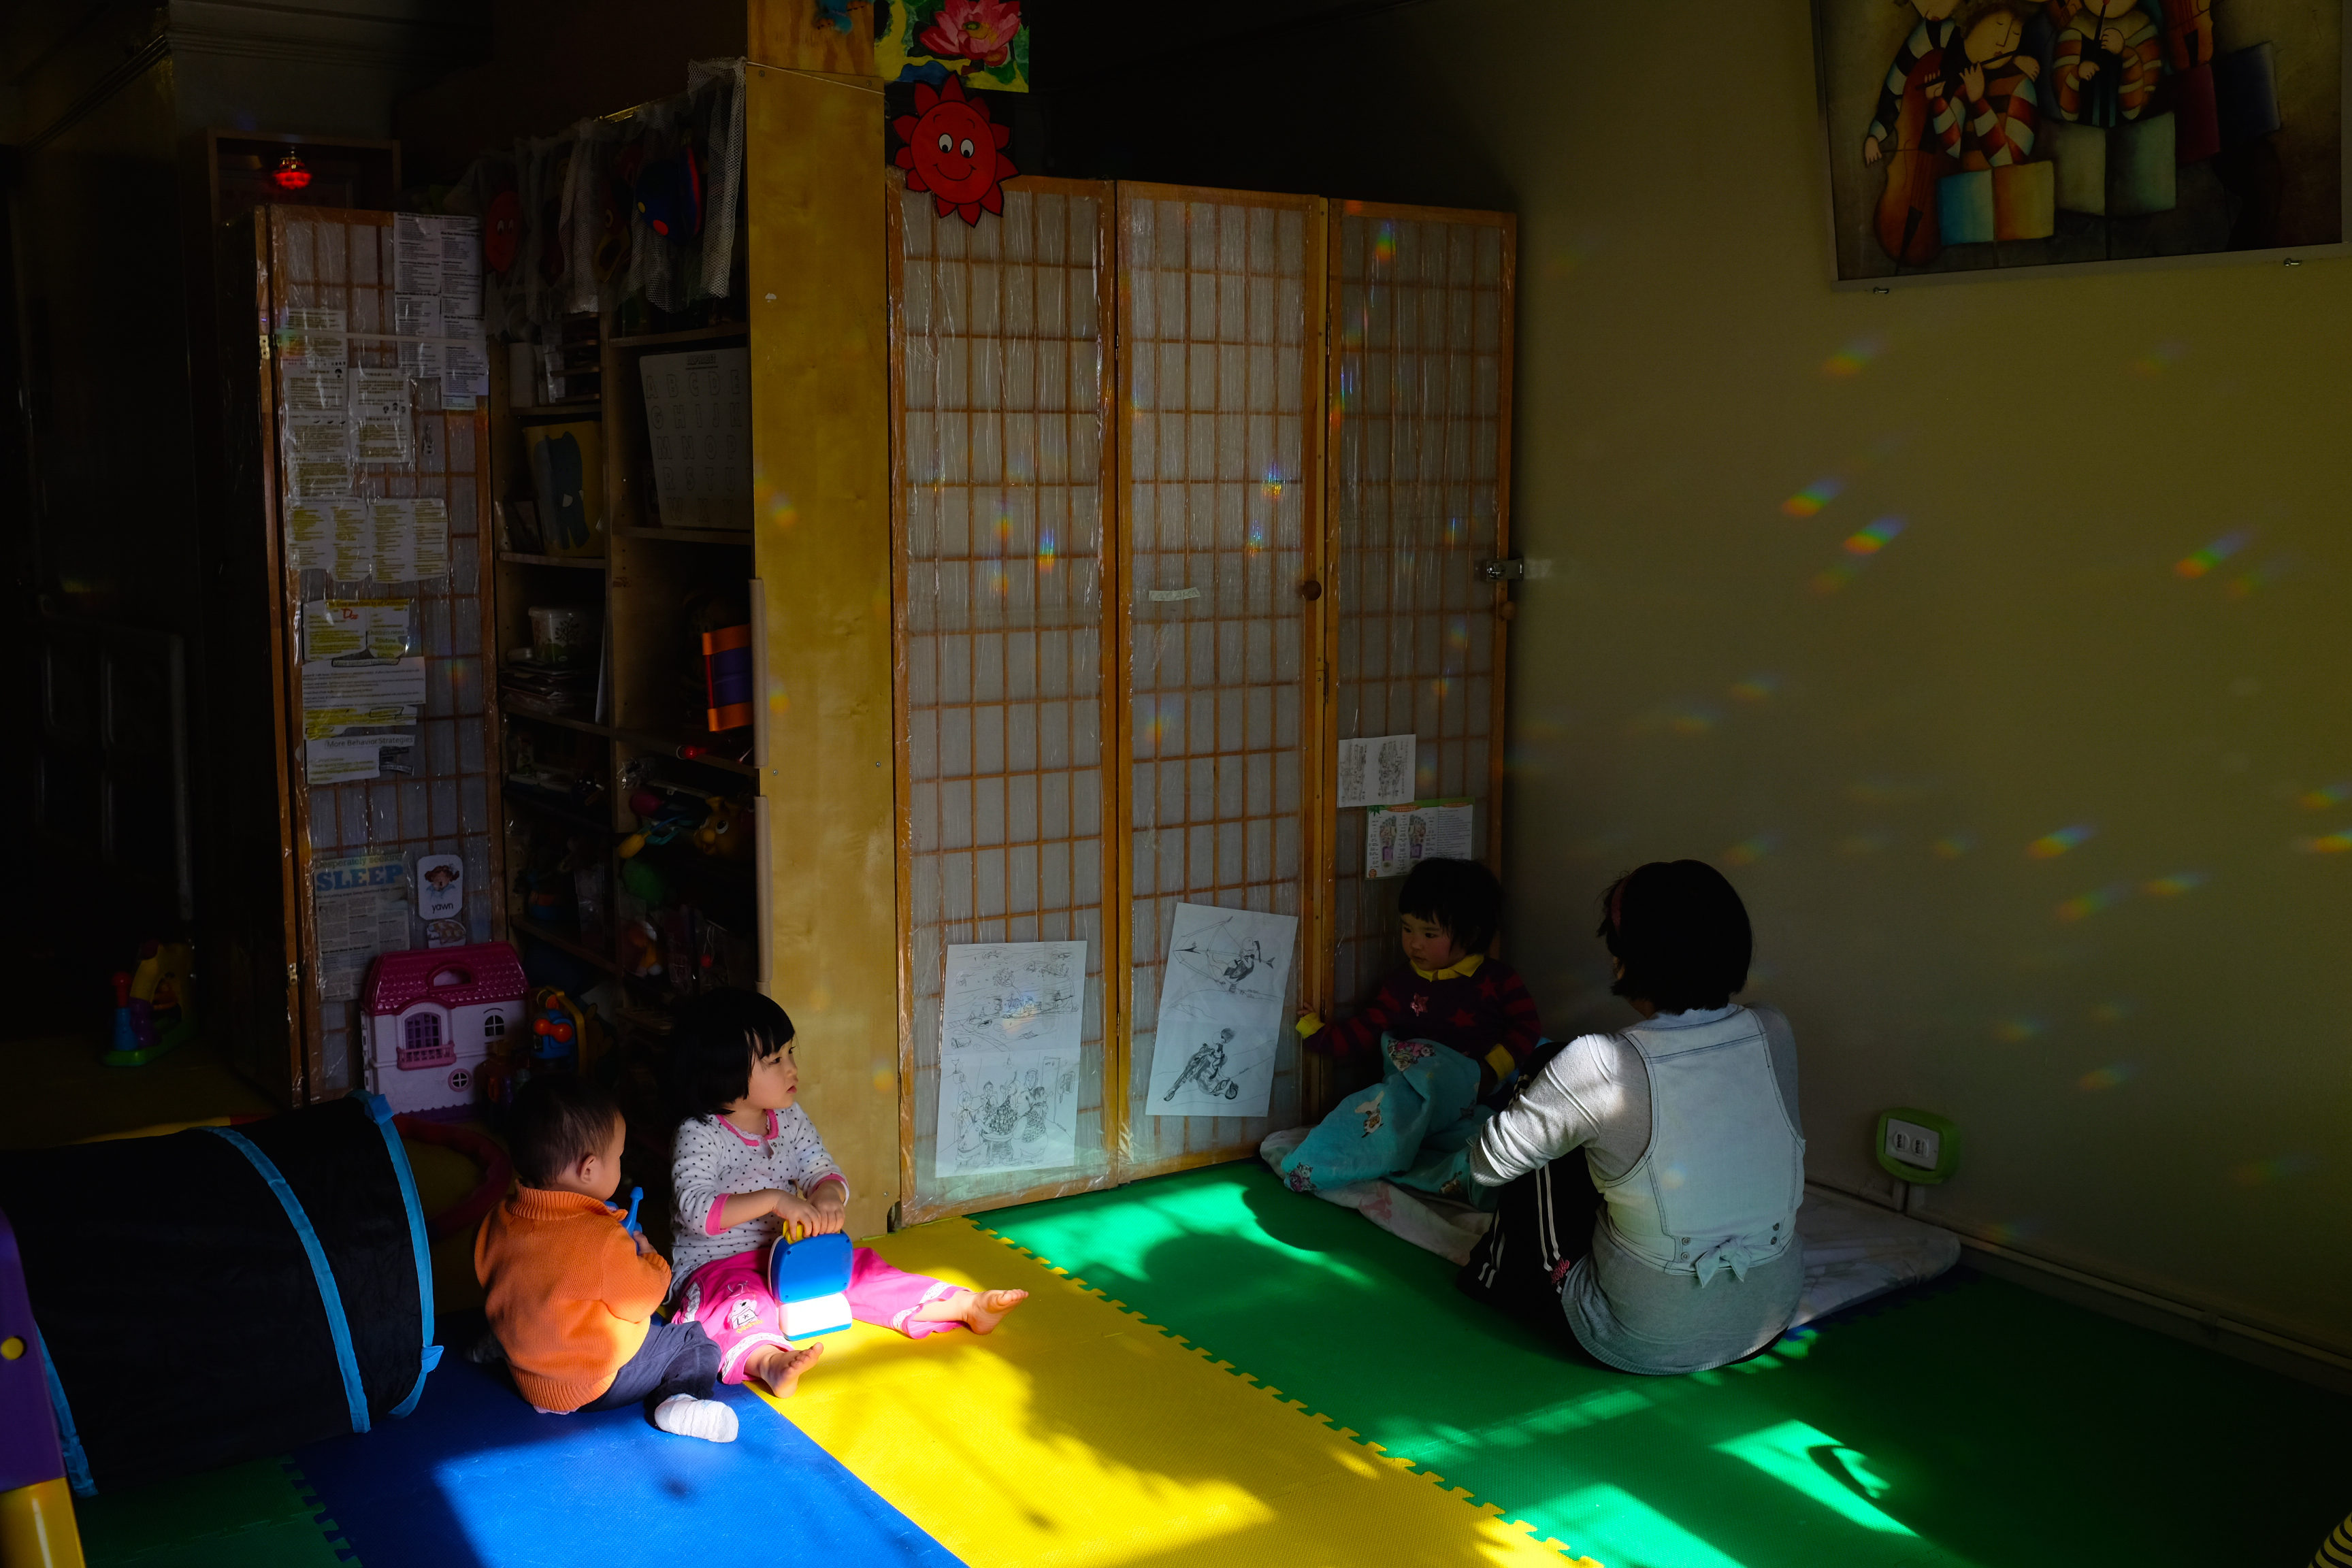 Struggling Mom and Pop Businesses – Chinese Childcare Providers in NYC Have a Hard Time Keeping Up